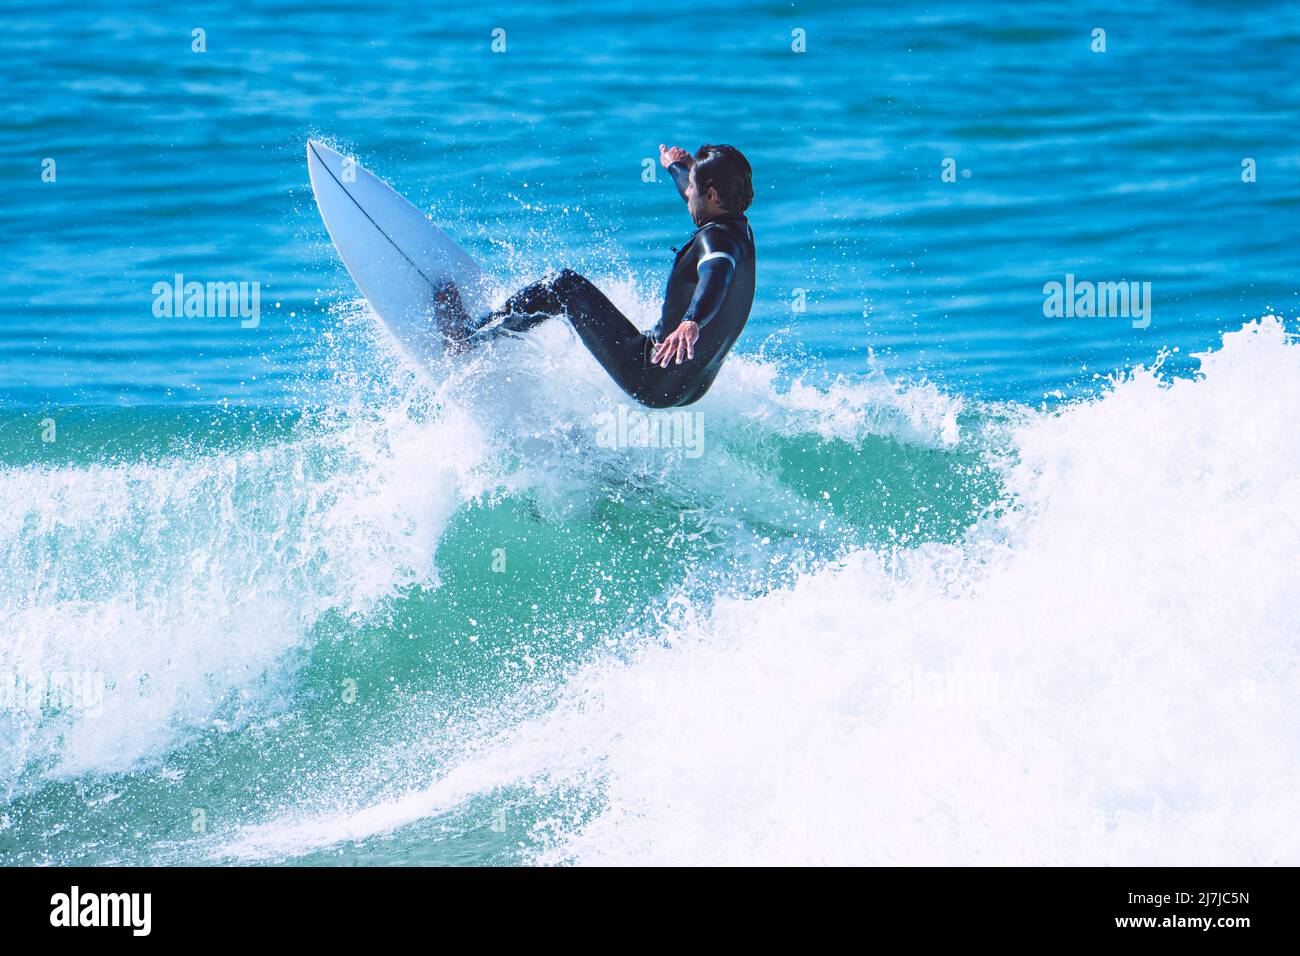 Surfer making trick on the wave on shortboard. Man catching waves in ocean. Water sports activity Stock Photo